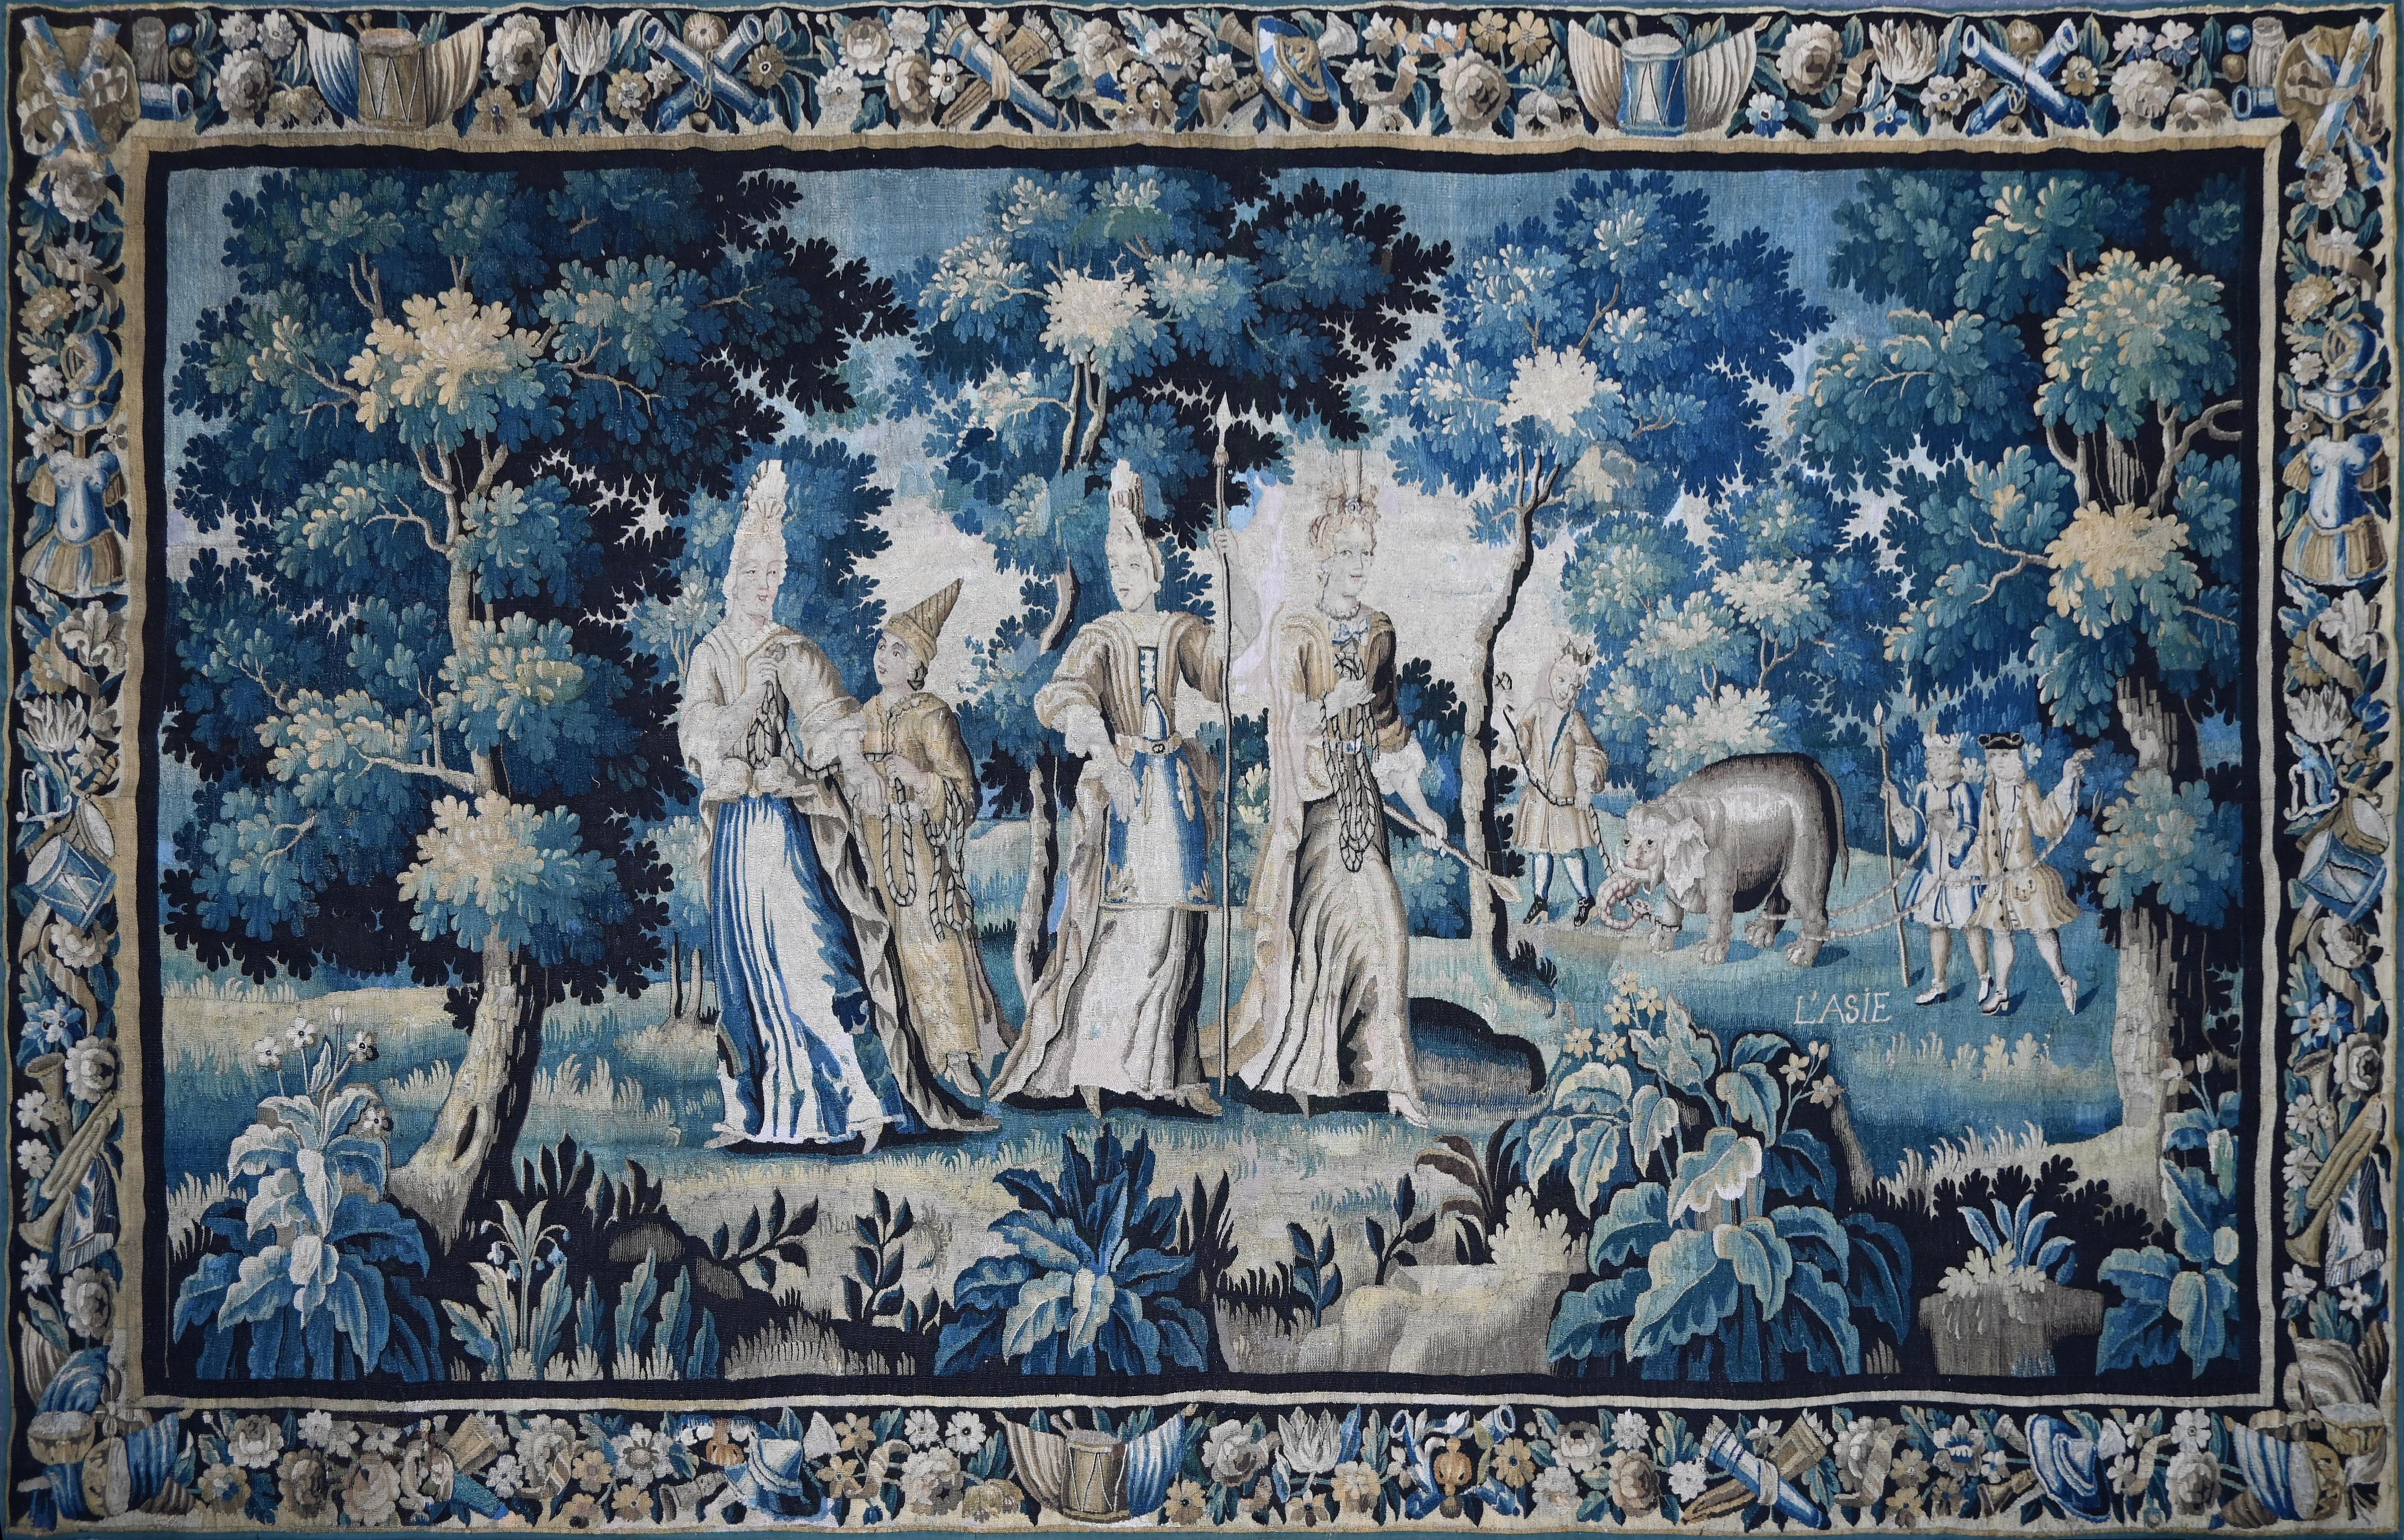 This Charming Aubusson Historical Tapestry depicts 